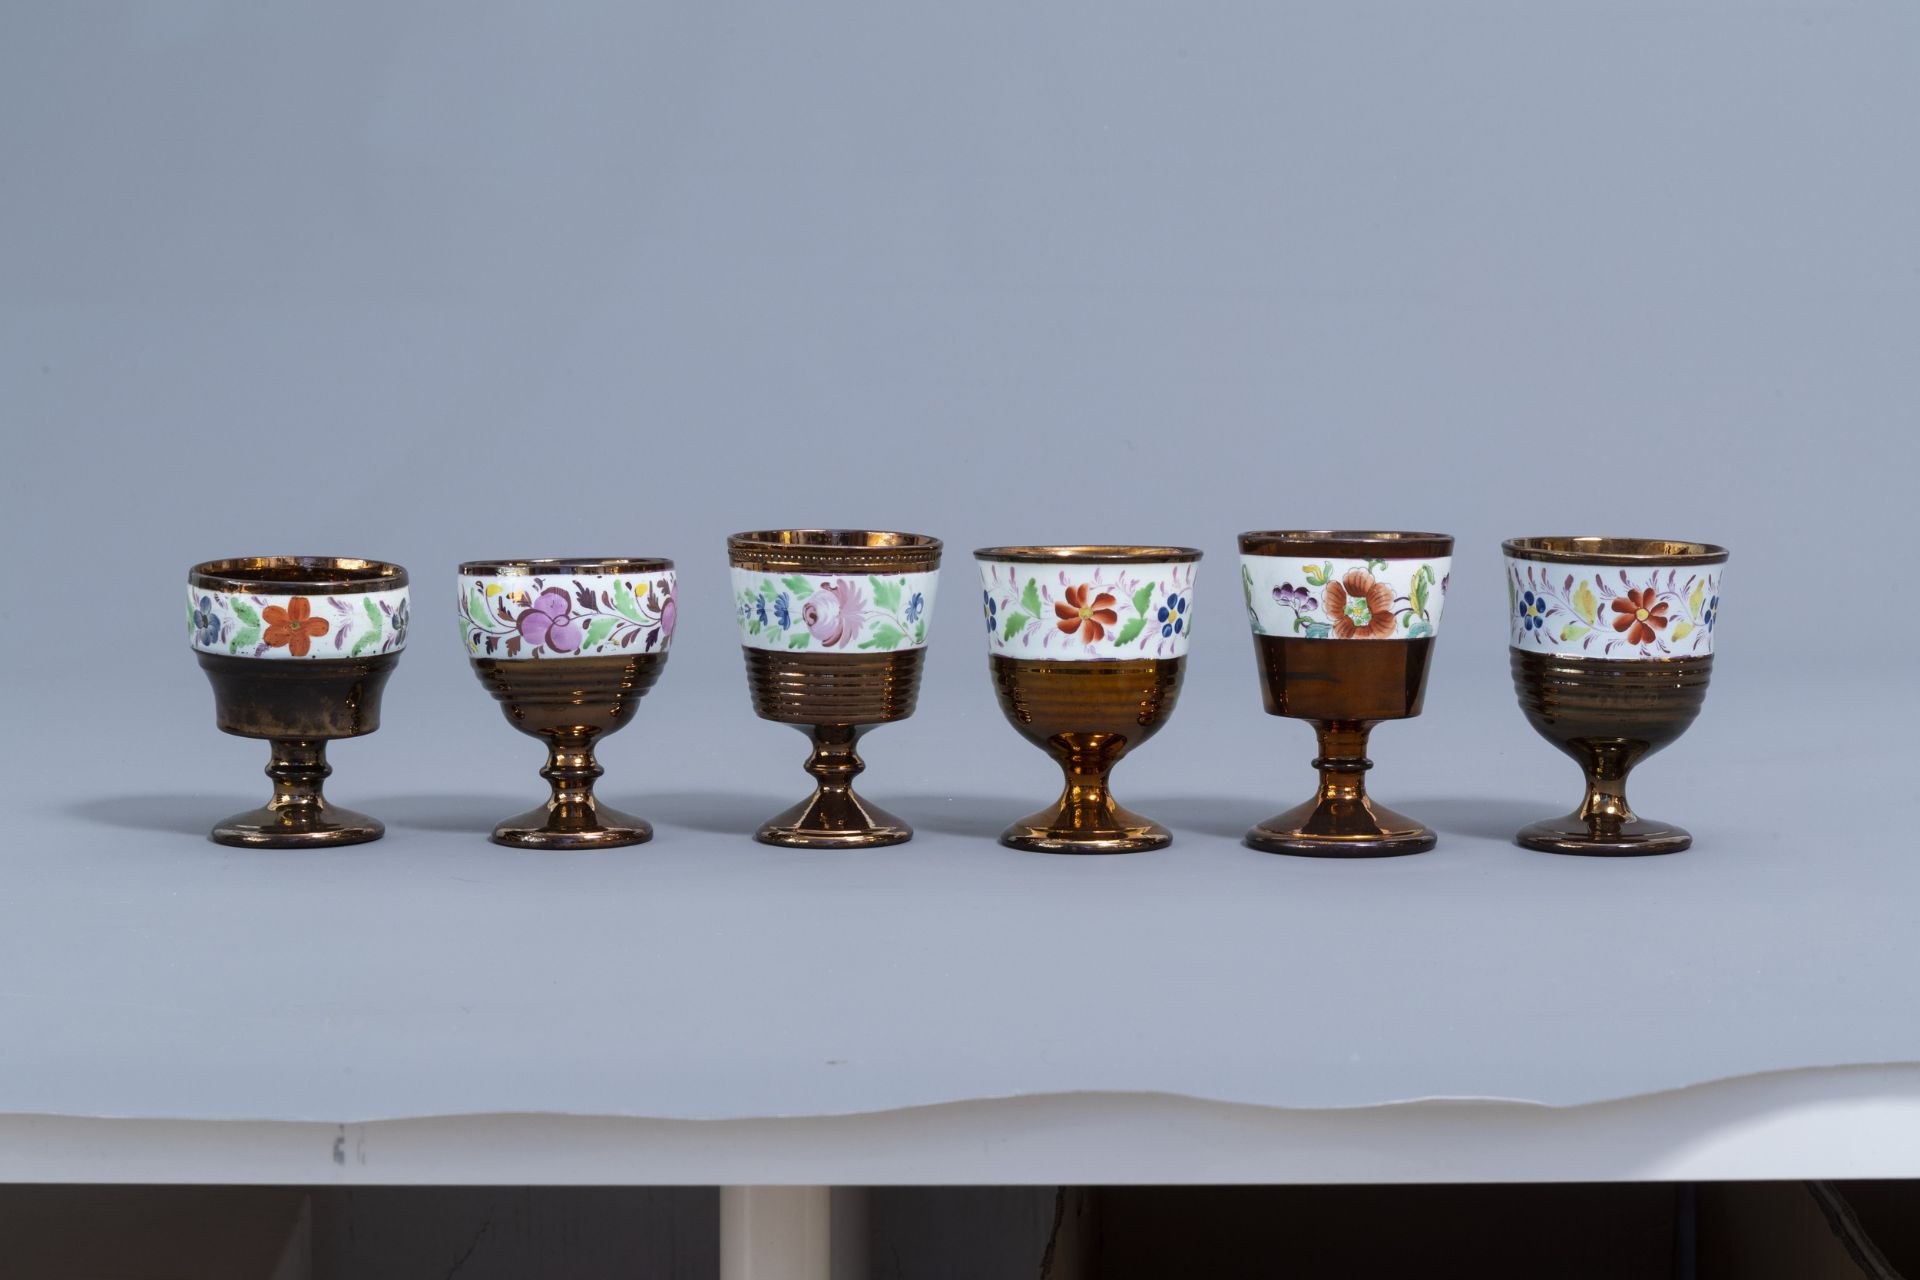 A varied collection of English lustreware items with polychrome floral design, 19th C. - Image 44 of 64